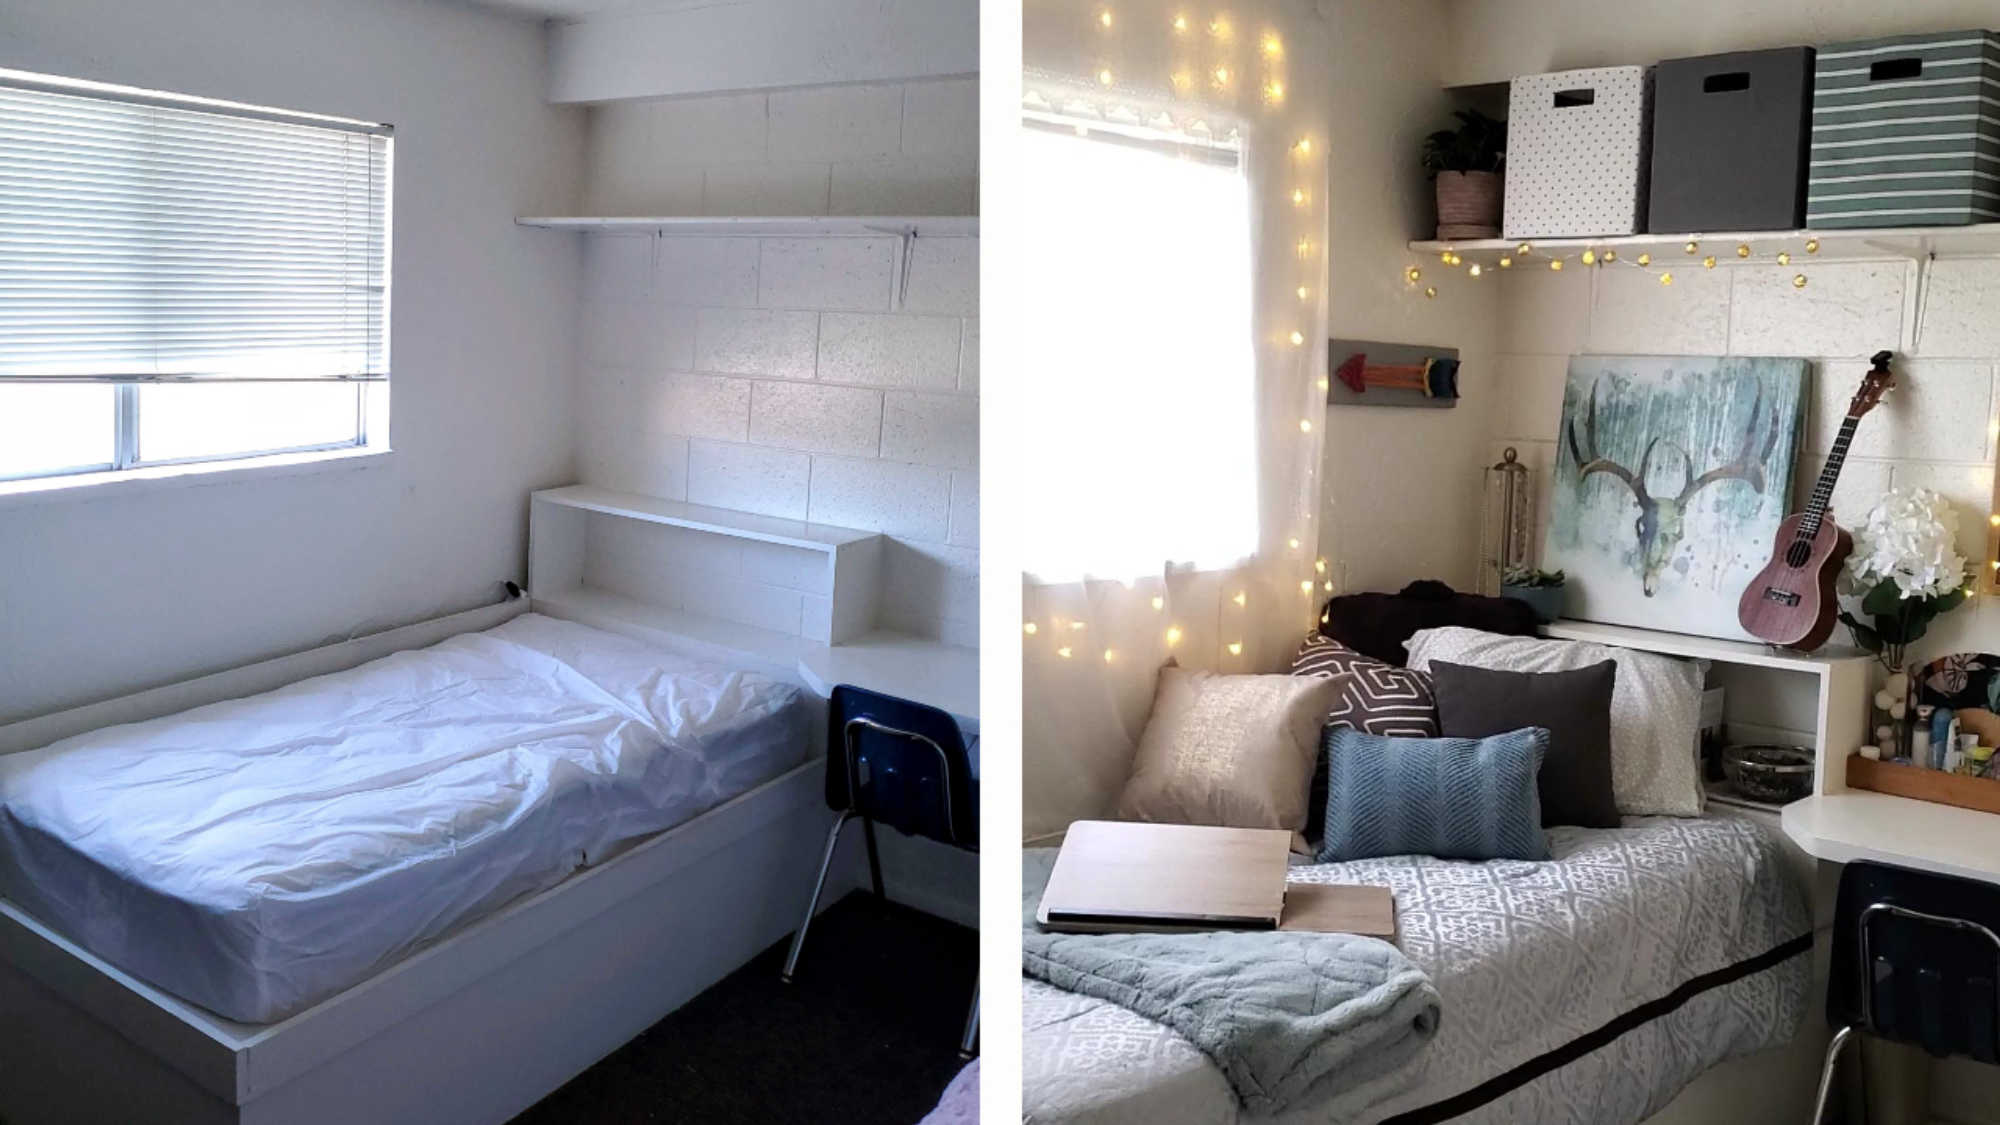 A side-by-side image. On the left is the "before" image of a dorm room with no decor. On the right is the "after" photo, showing bedding, decor, and organizational items purchased from DI.